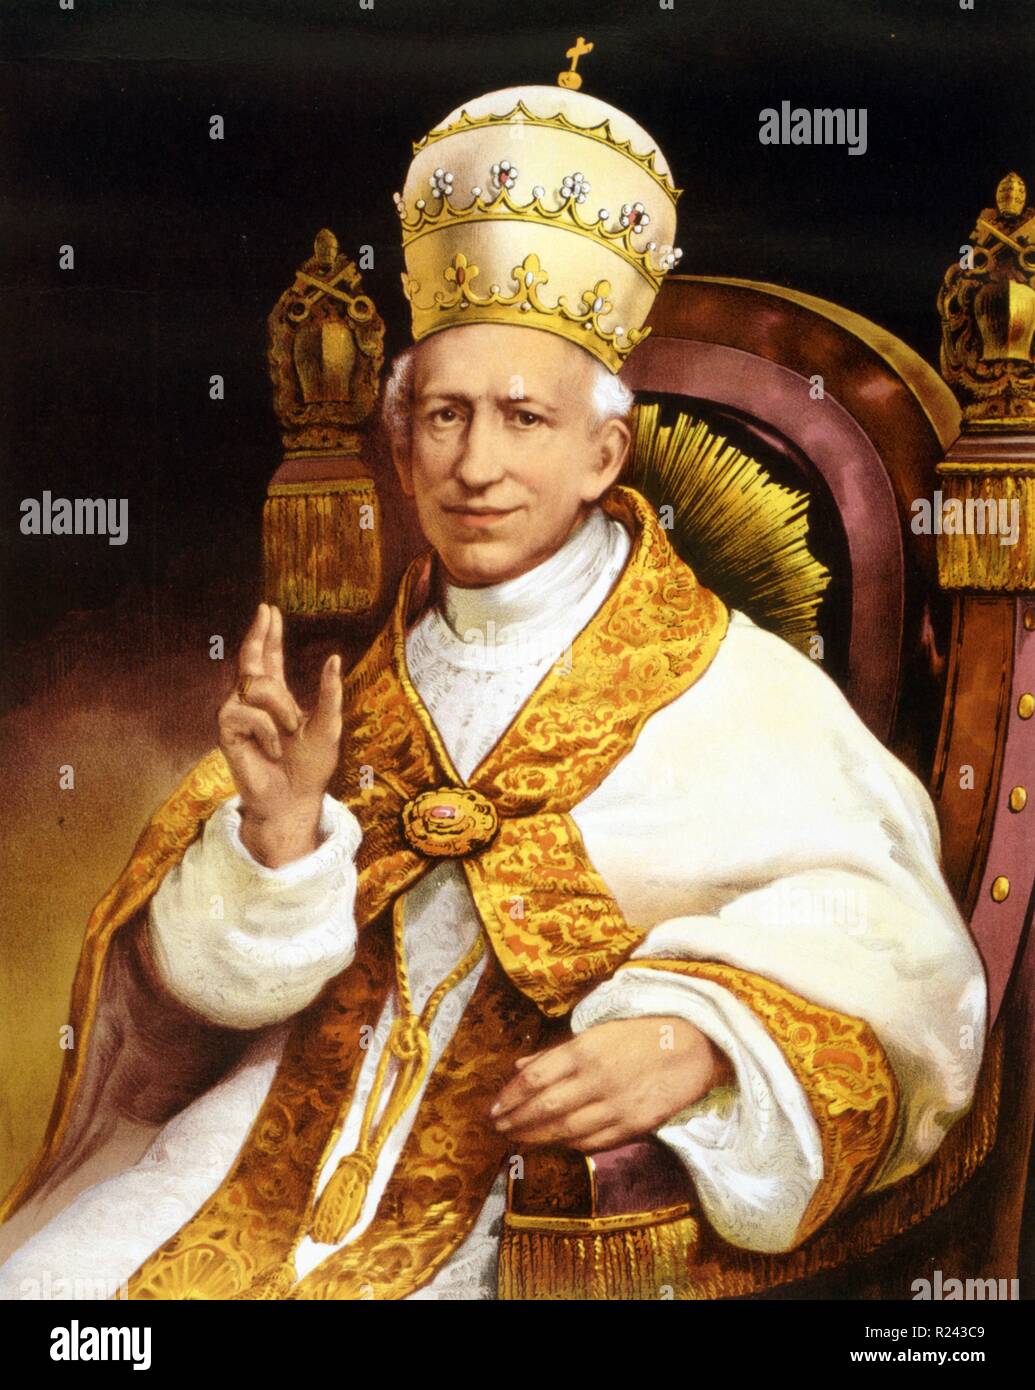 Colour portrait of Pope Leo XIII. Dated 1878 Stock Photo